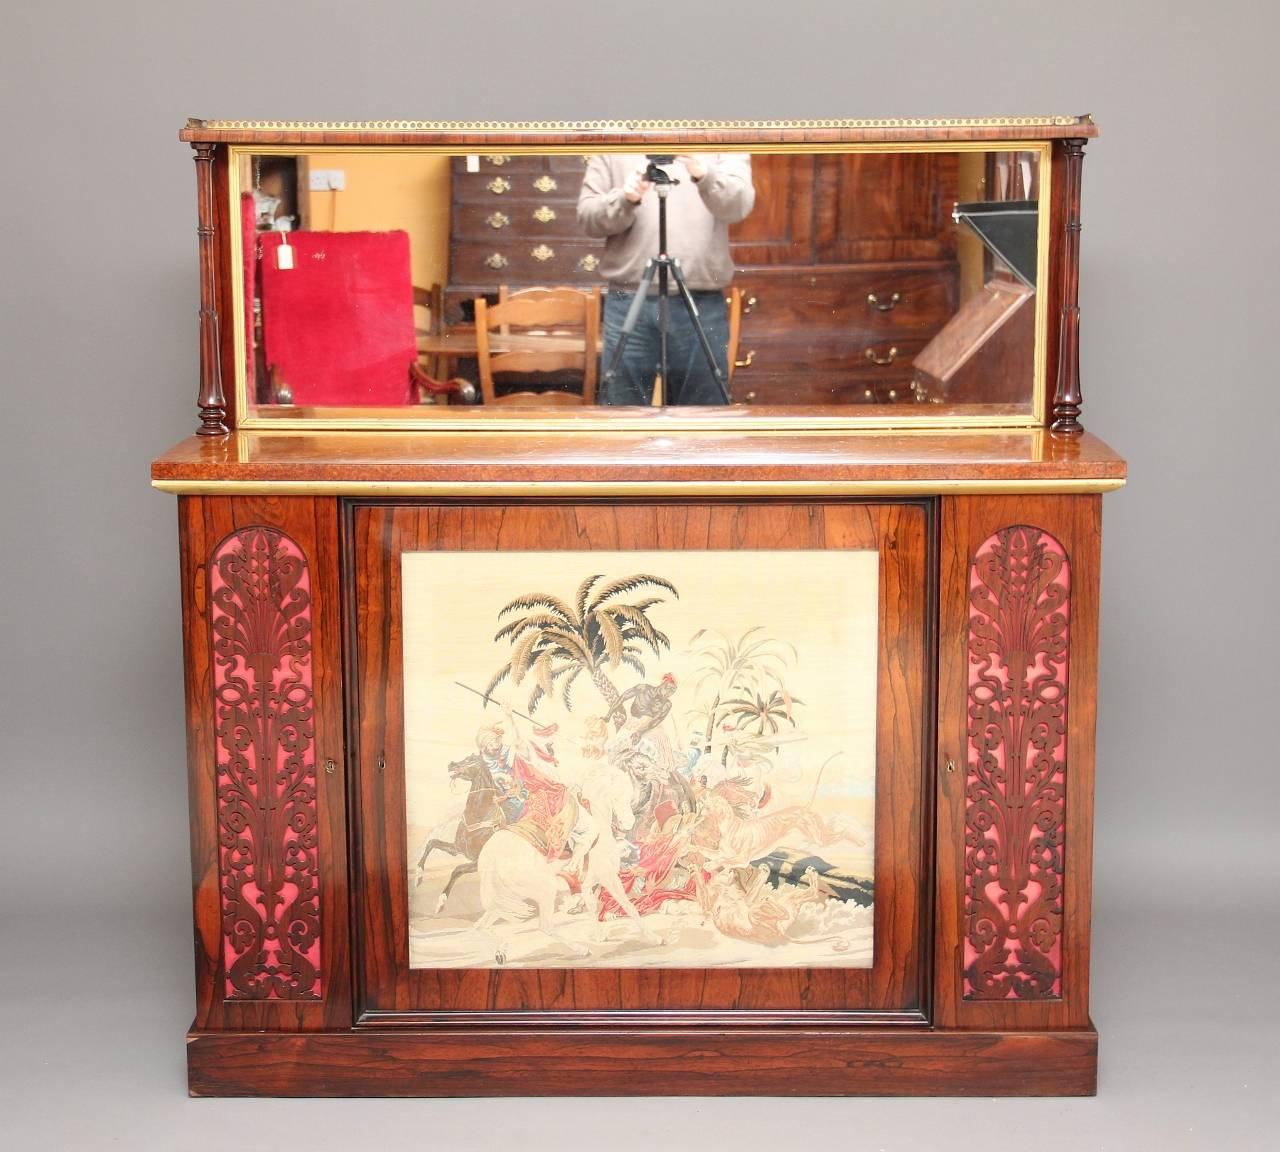 19th century rosewood cabinet with a burr walnut top, the top section with mirror back with a shelf with a brass gallery running along the top, supported on turned columns, with a burr walnut top with gilded mouldings, the cabinet section with a